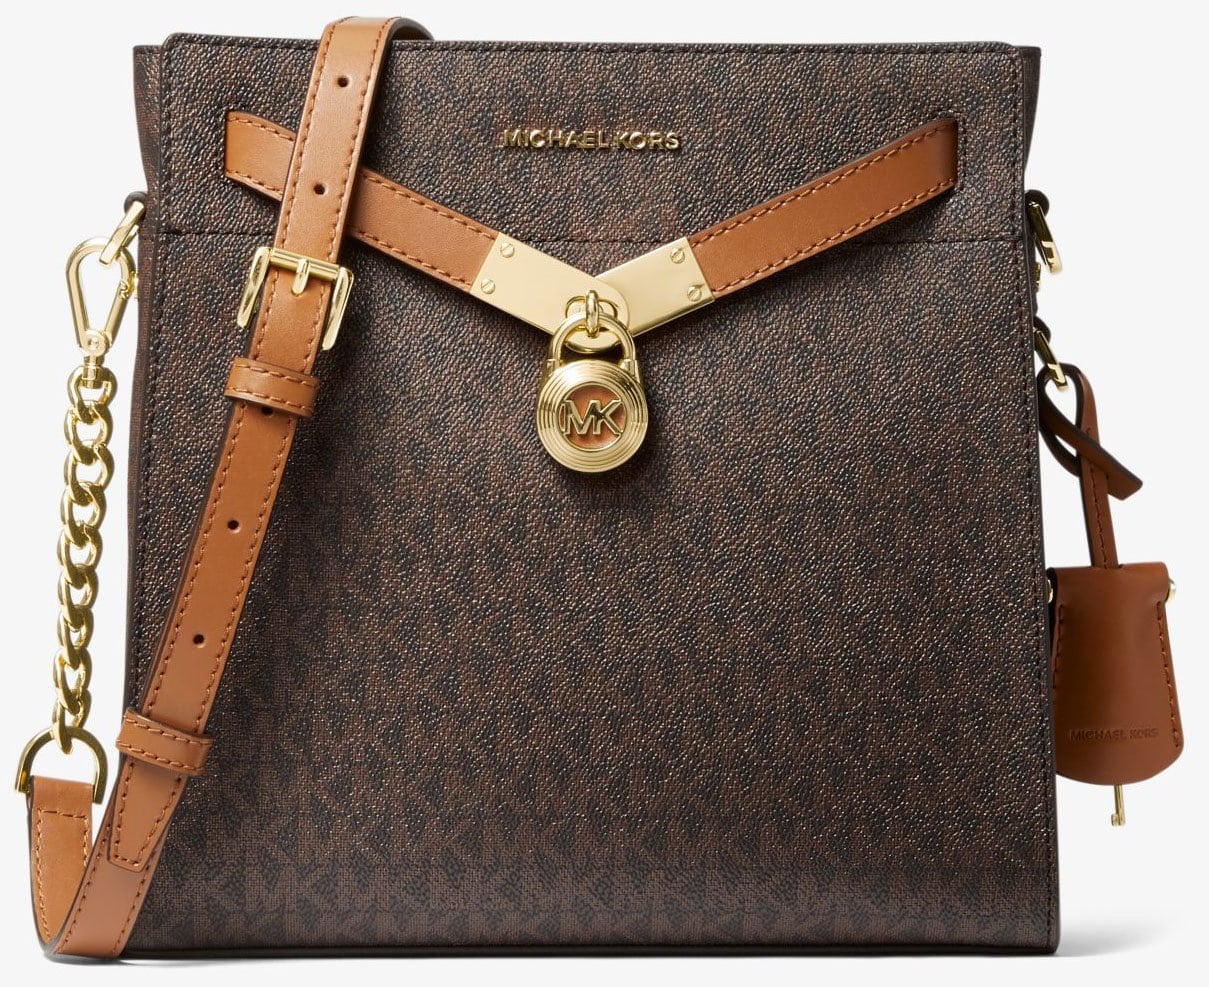 Michael Kors' Nouveau Hamilton messenger bag is considered as one of the label's classic bag designs